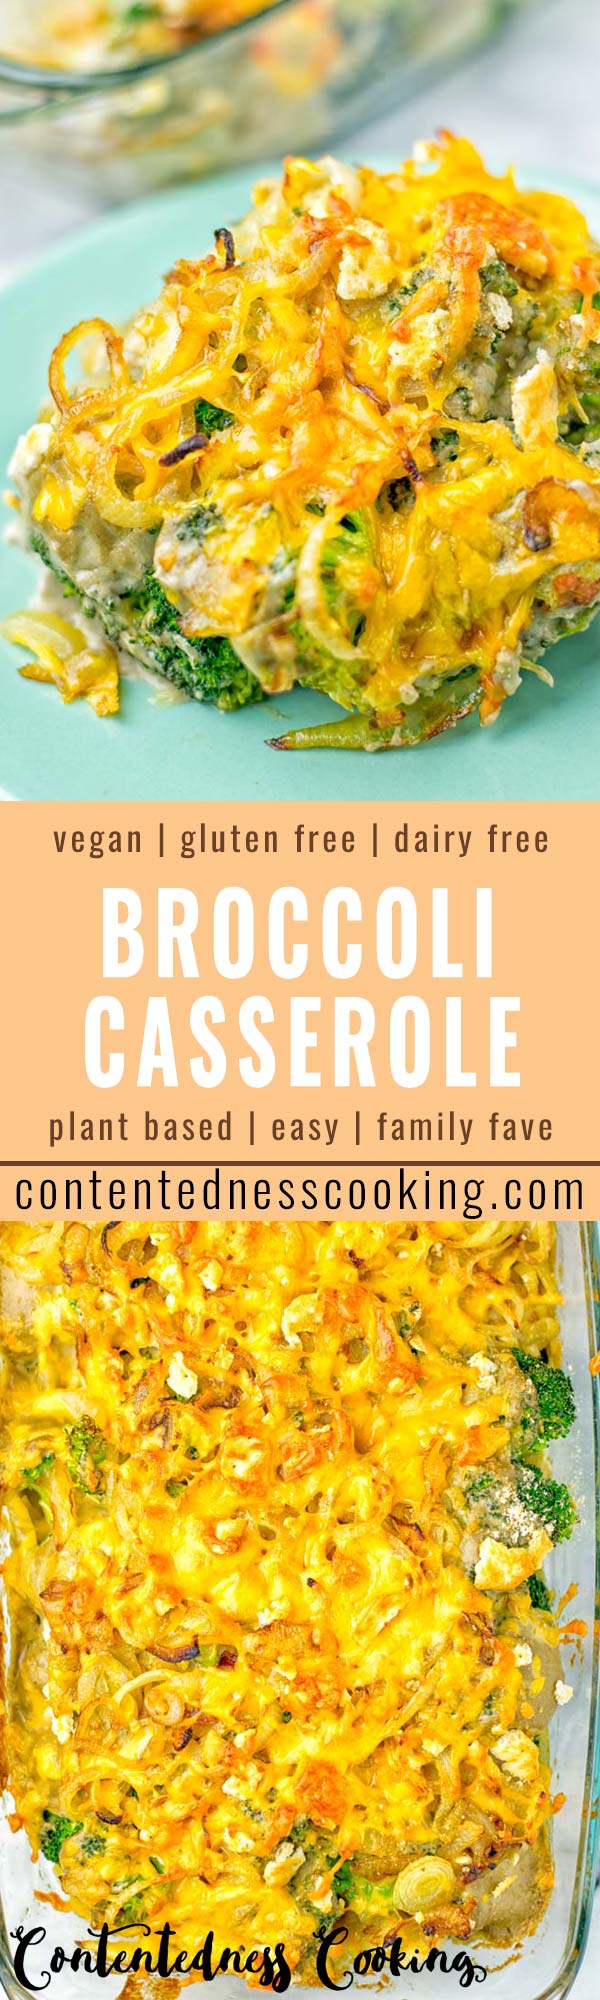 This Vegan Broccoli Casserole is made with a homemade dairy free cream of mushroom soup, onions, broccoli, topped with vegan cheddar and baked to perfection in 30 minutes. No one will guess it’s vegan and gluten free. Creamy, cheesy, hearty a winning combo for dinner, lunch, meal prep that the whole family will love. #vegan #dairyfree #glutenfree #vegetarian #contentednesscooking #broccolicasseroleeasy #dinner #lunch #mealprep #worklunchideas #kidsmeals #familydinner #comfortfood